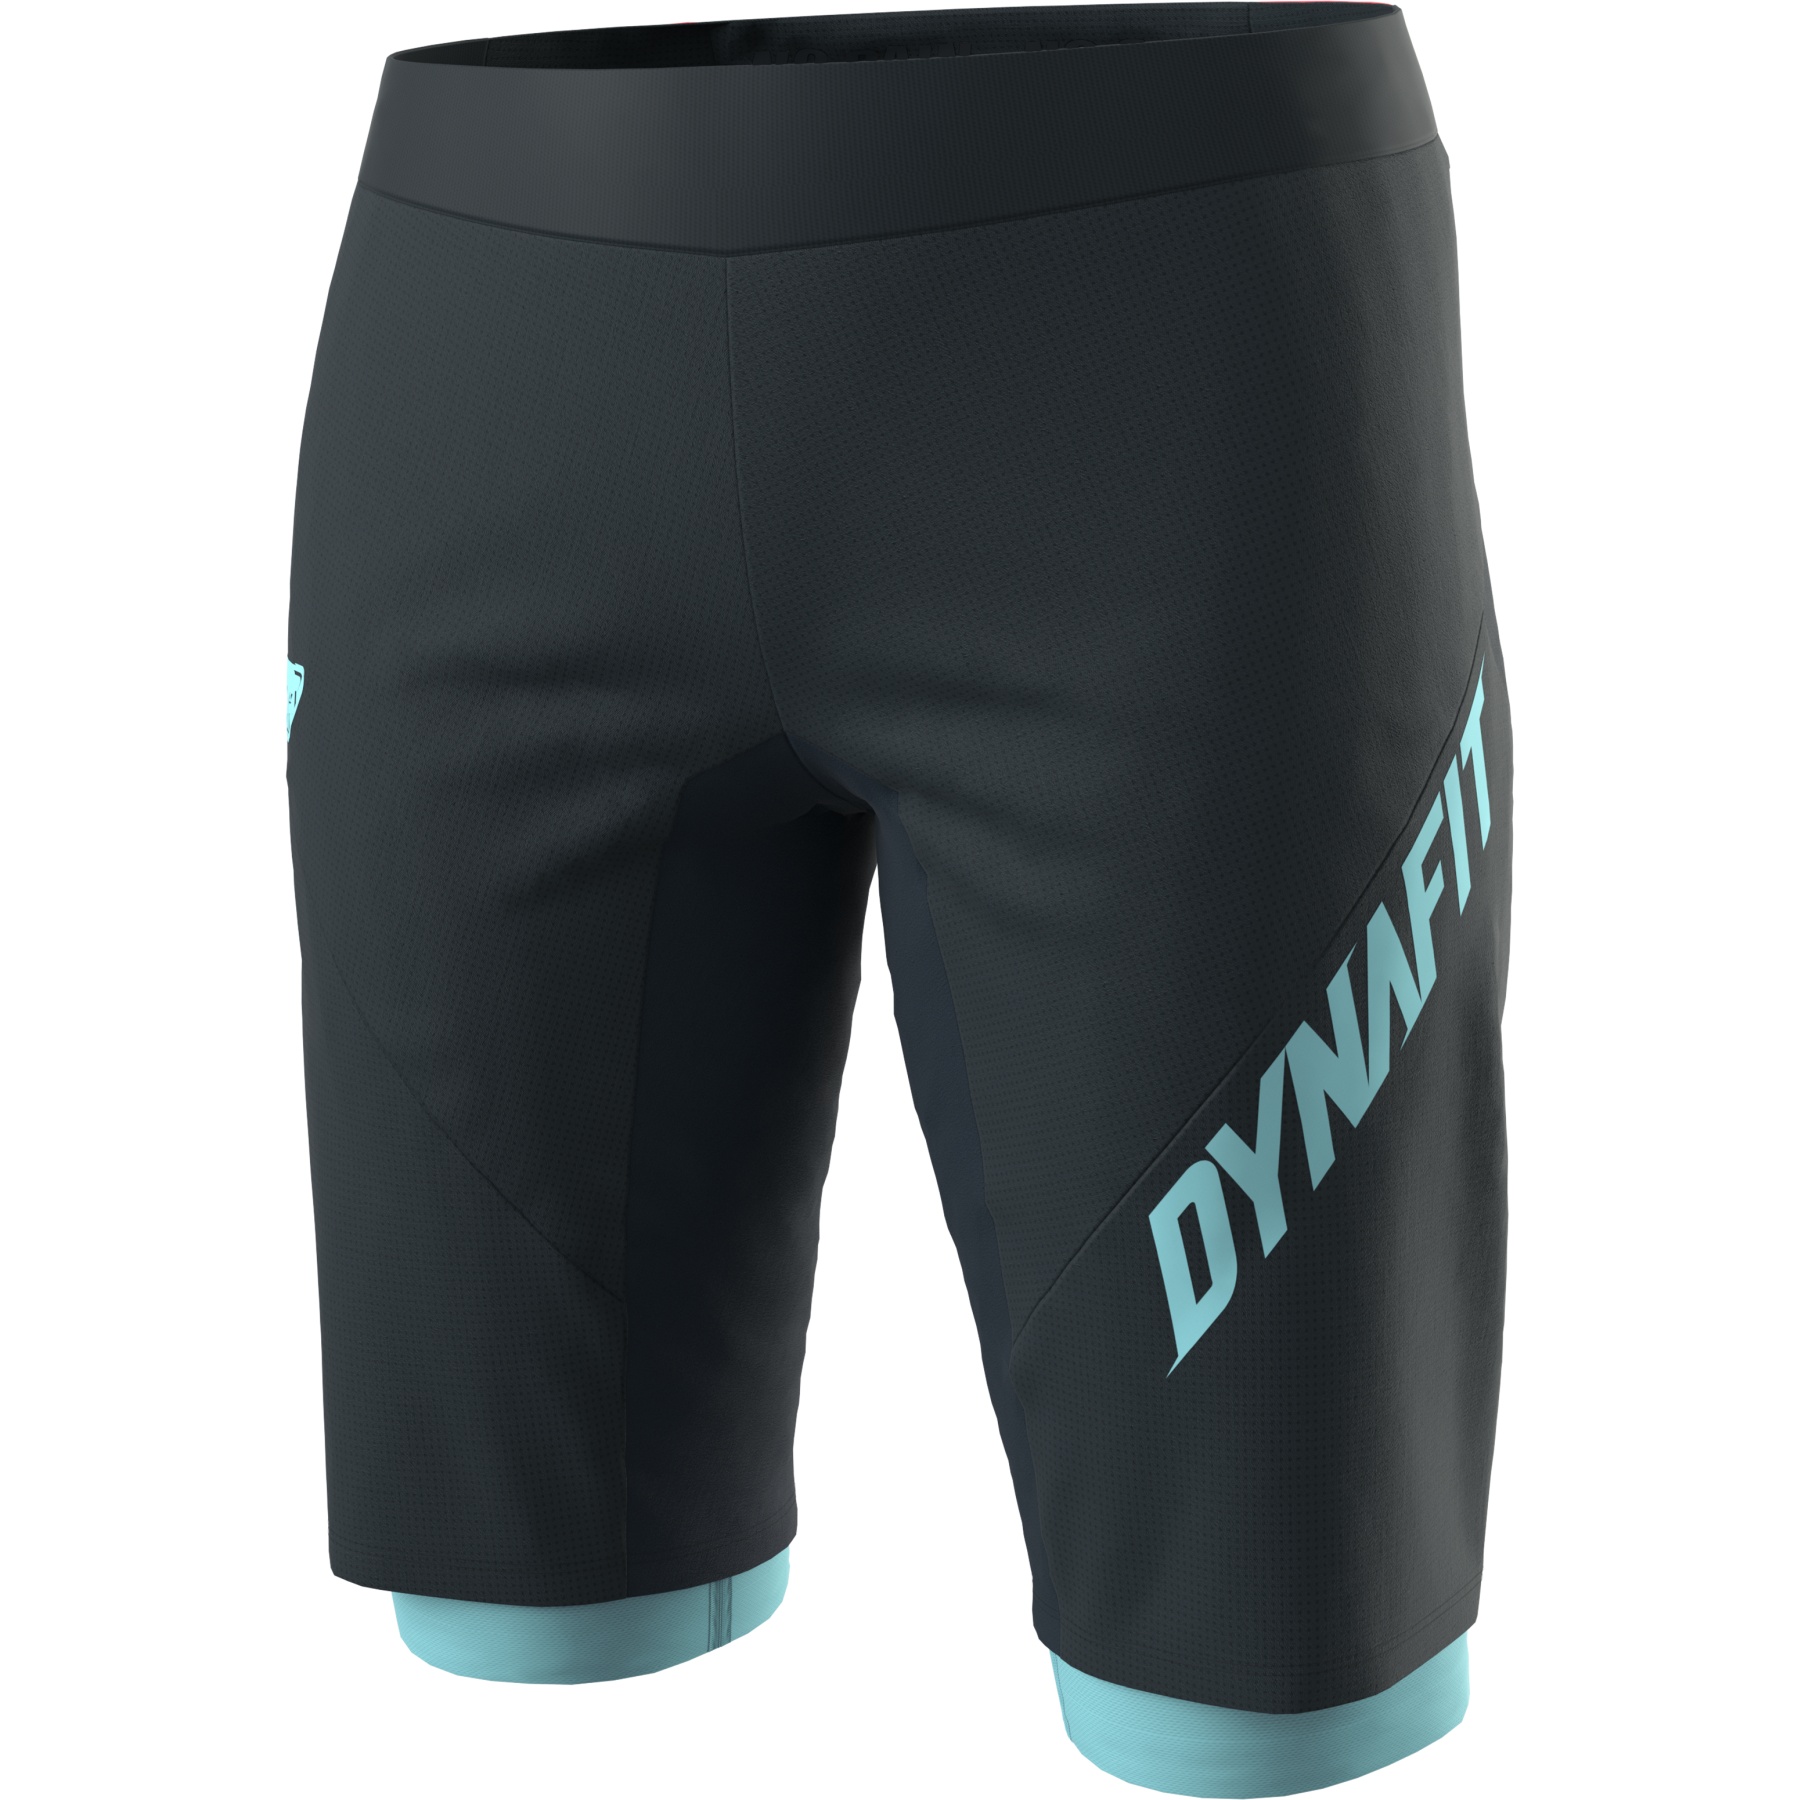 Productfoto van Dynafit Ride Light 2in1 Shorts Dames - Blueberry Marine Blue